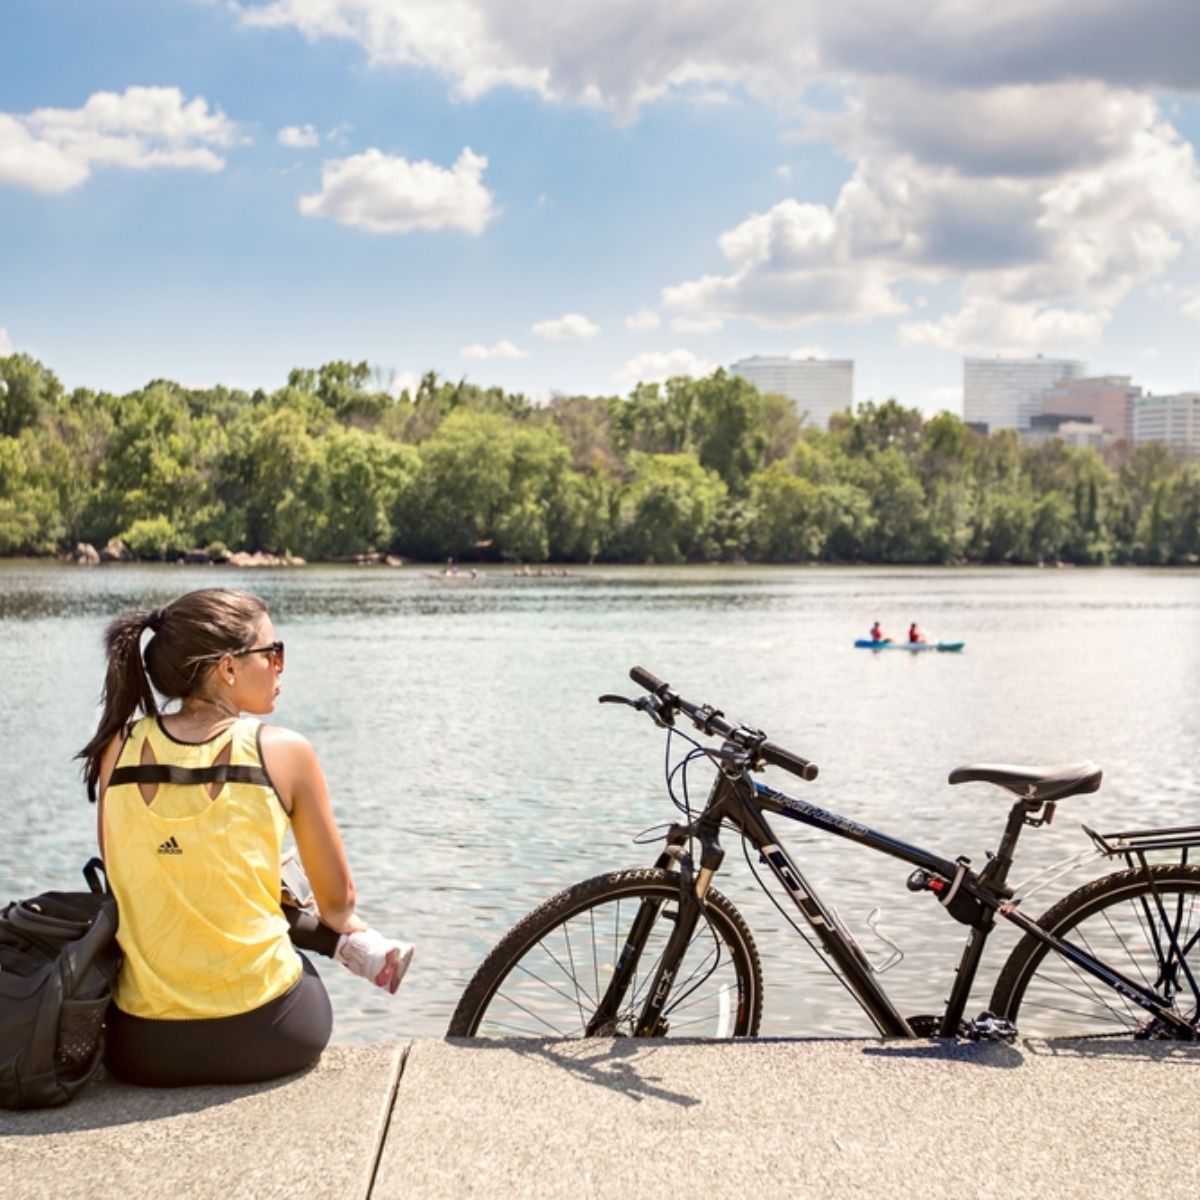 A girl sitting in front of river with bicycle parked on side